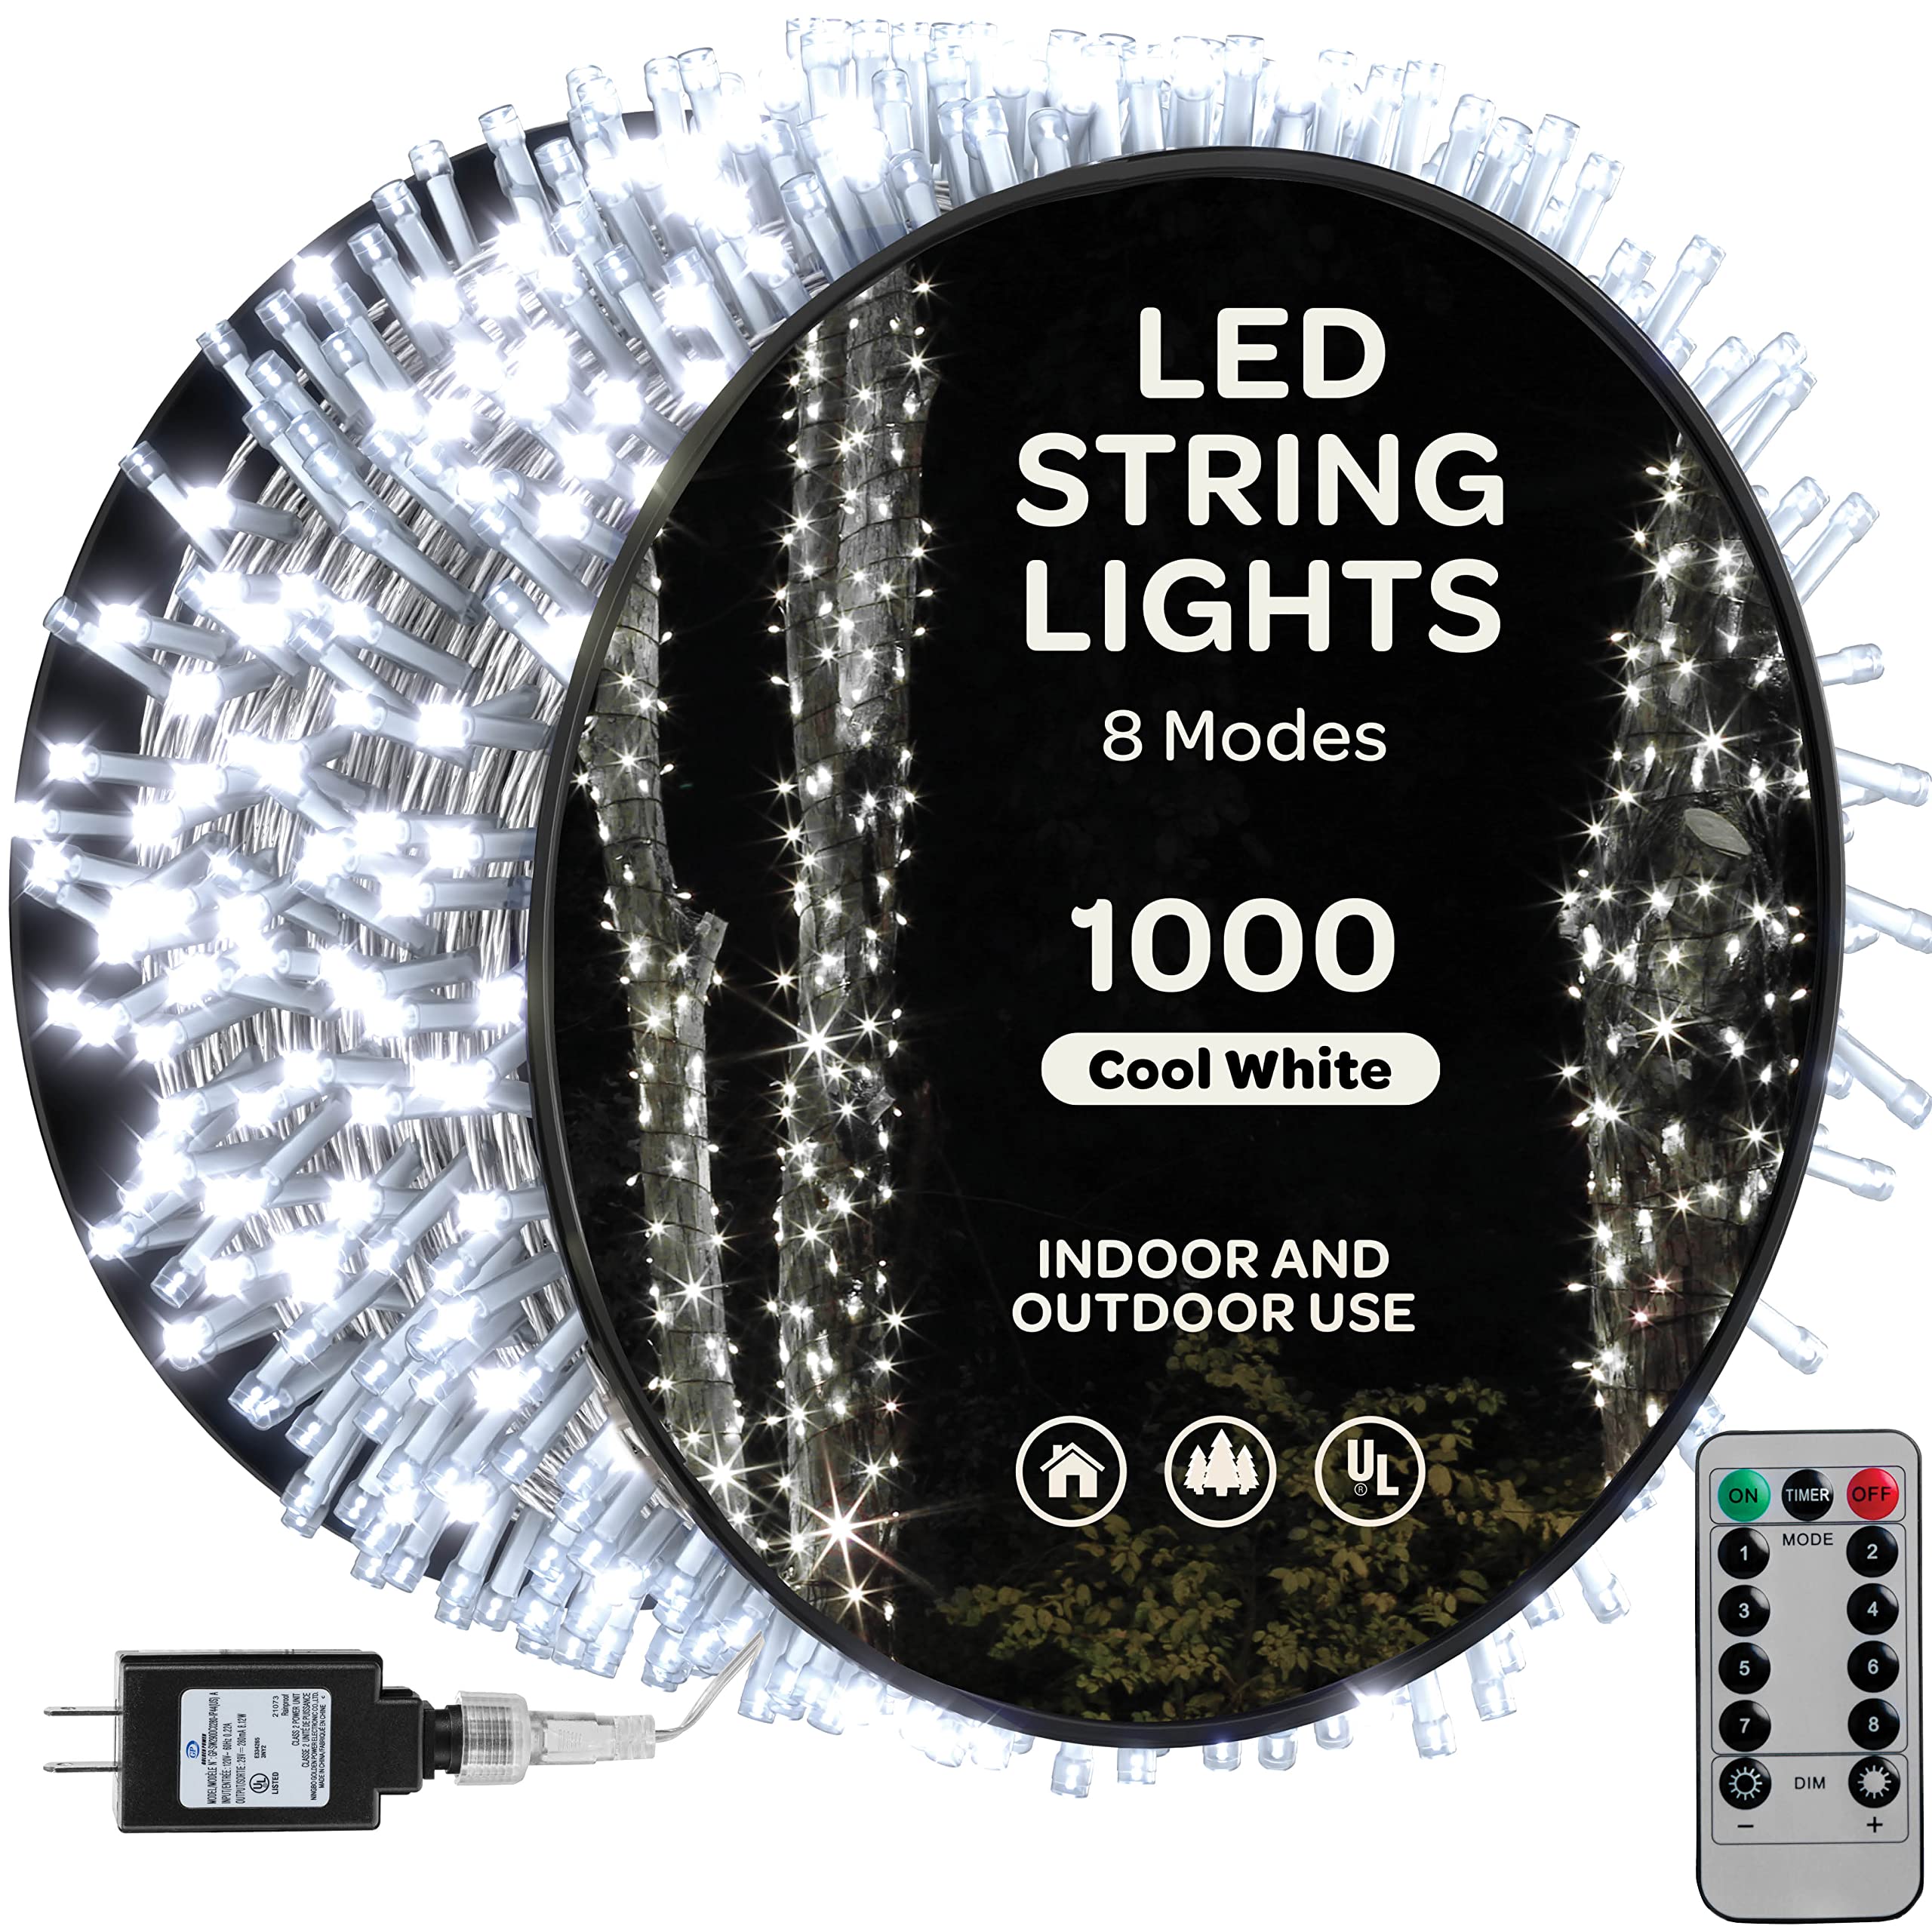 SEWANTA 1000 LED Christmas Lights 400ft Super Long String Lights - Remote with 8 Modes/Timer/dimmable - UL Approved for Indoor/Outdoor Use - for Holiday/Christmas/Party/Decorations (Clear Wire)  - Like New